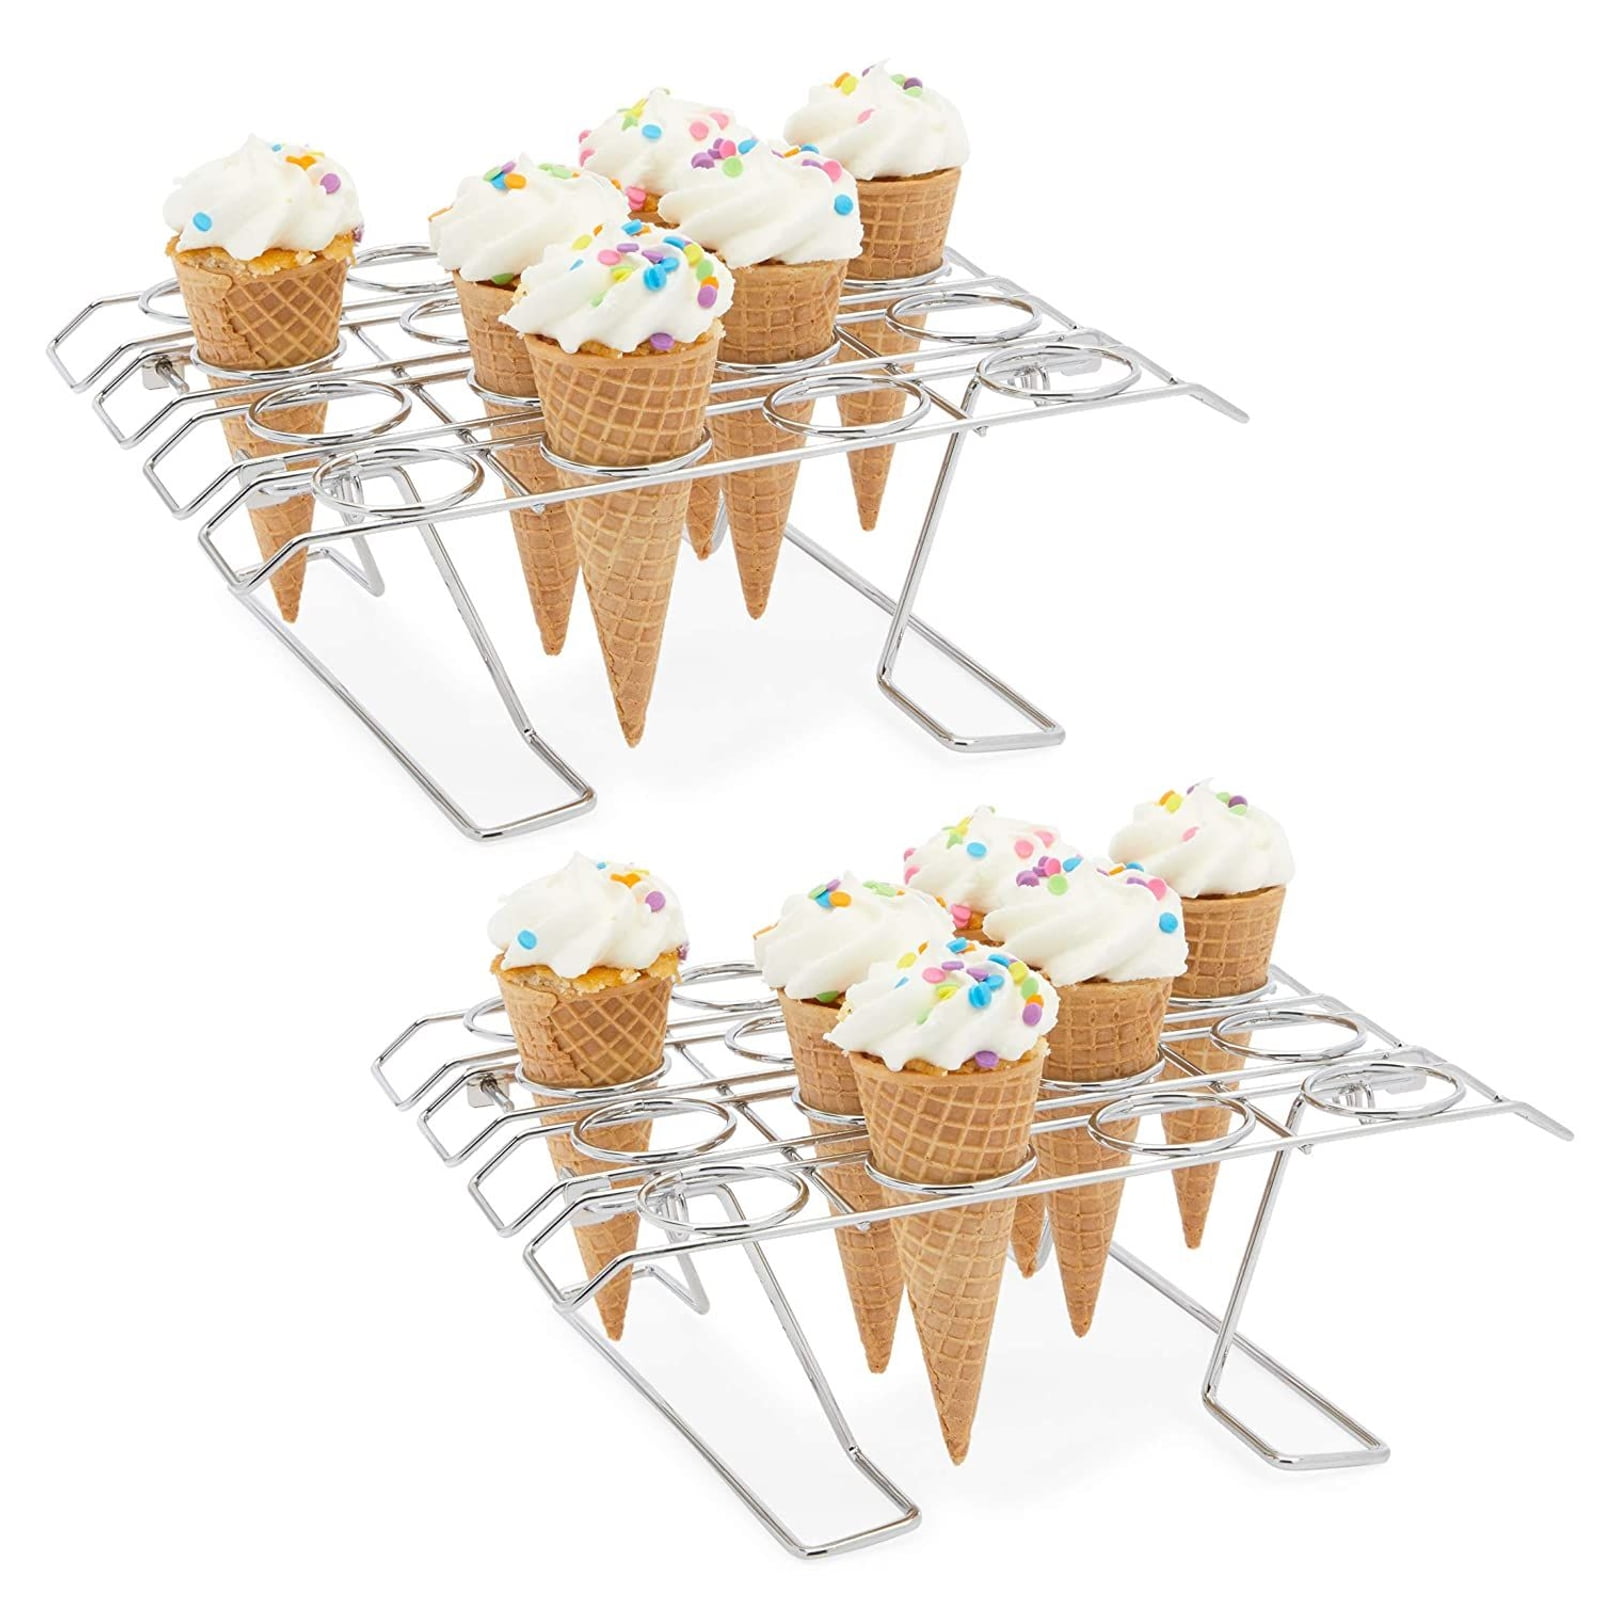 ACRYLIC ICE-CREAM CONE HOLDER STAND RACK CARRIER CADDY 